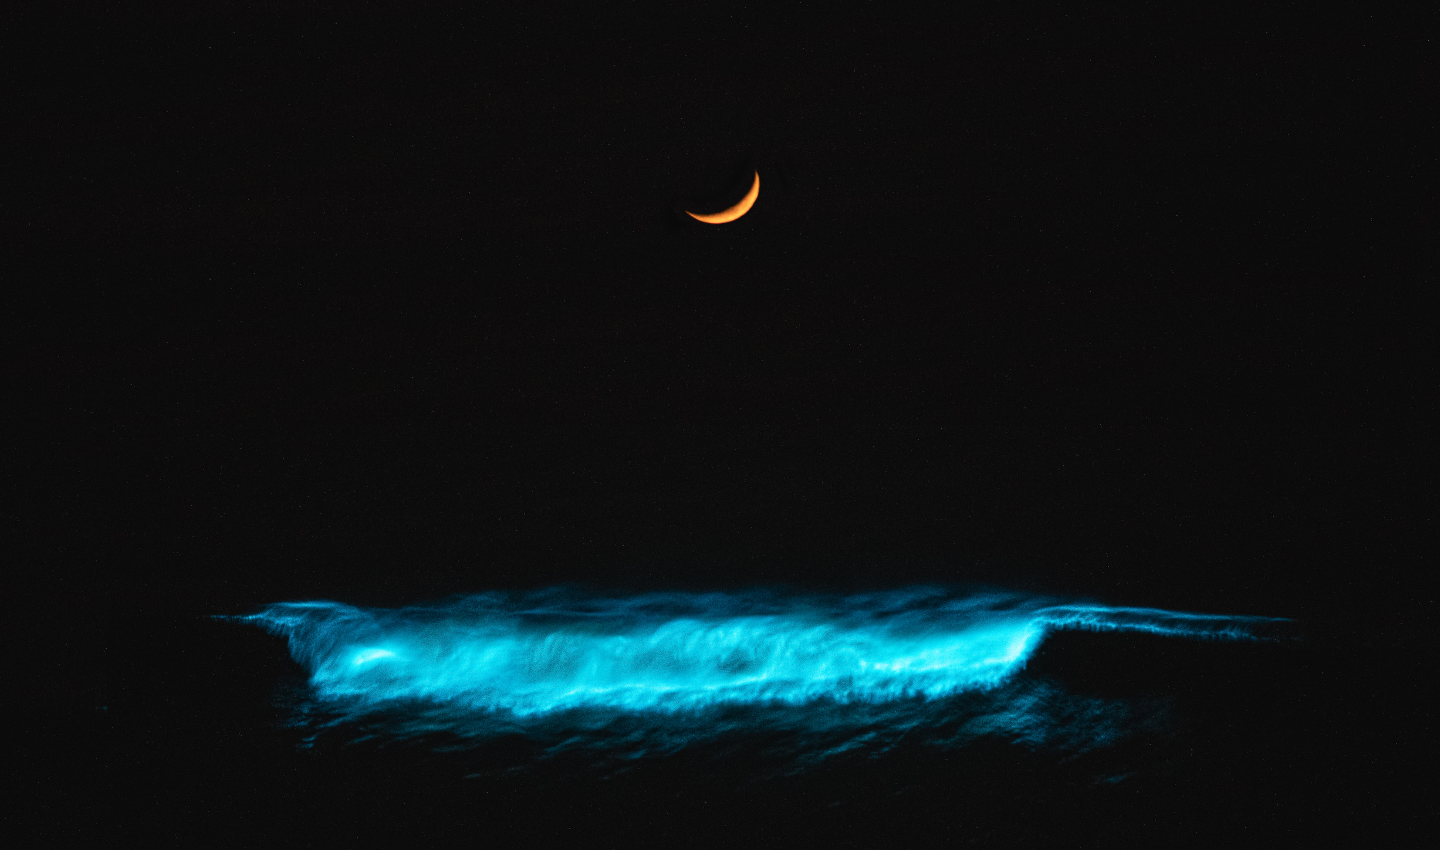 Interesting animals that use bioluminescence in the Ocean.